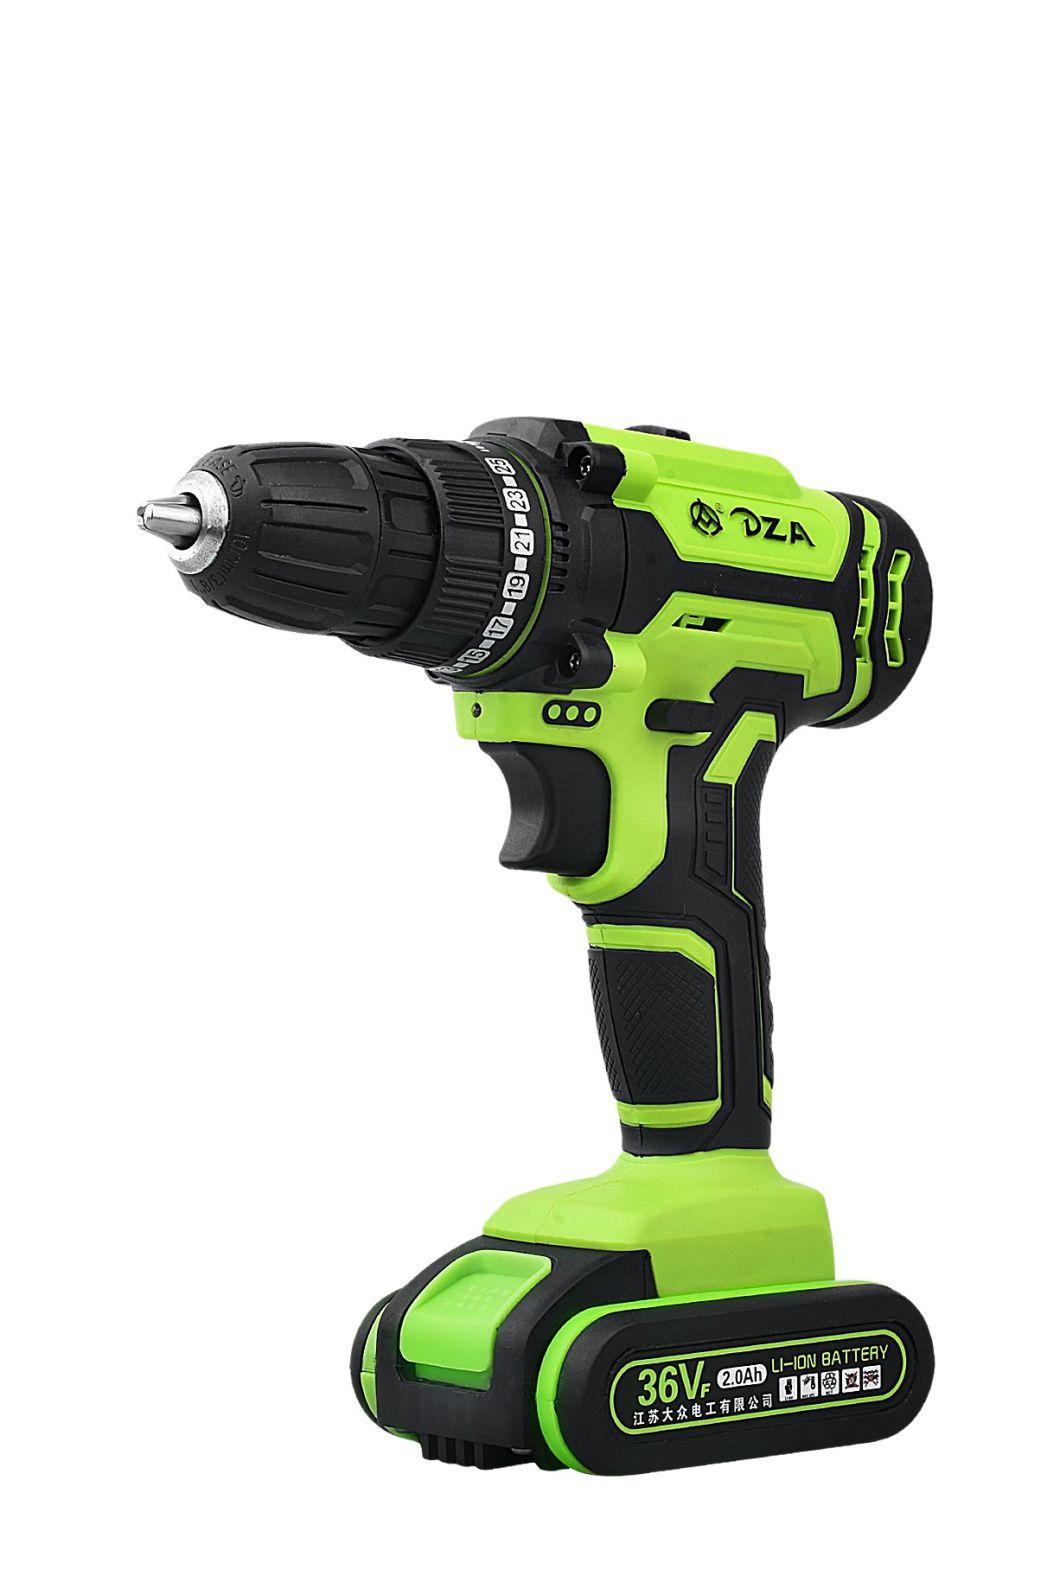 Durable Electric Power Tools Lithium Cordless Drill for DIY Using Home